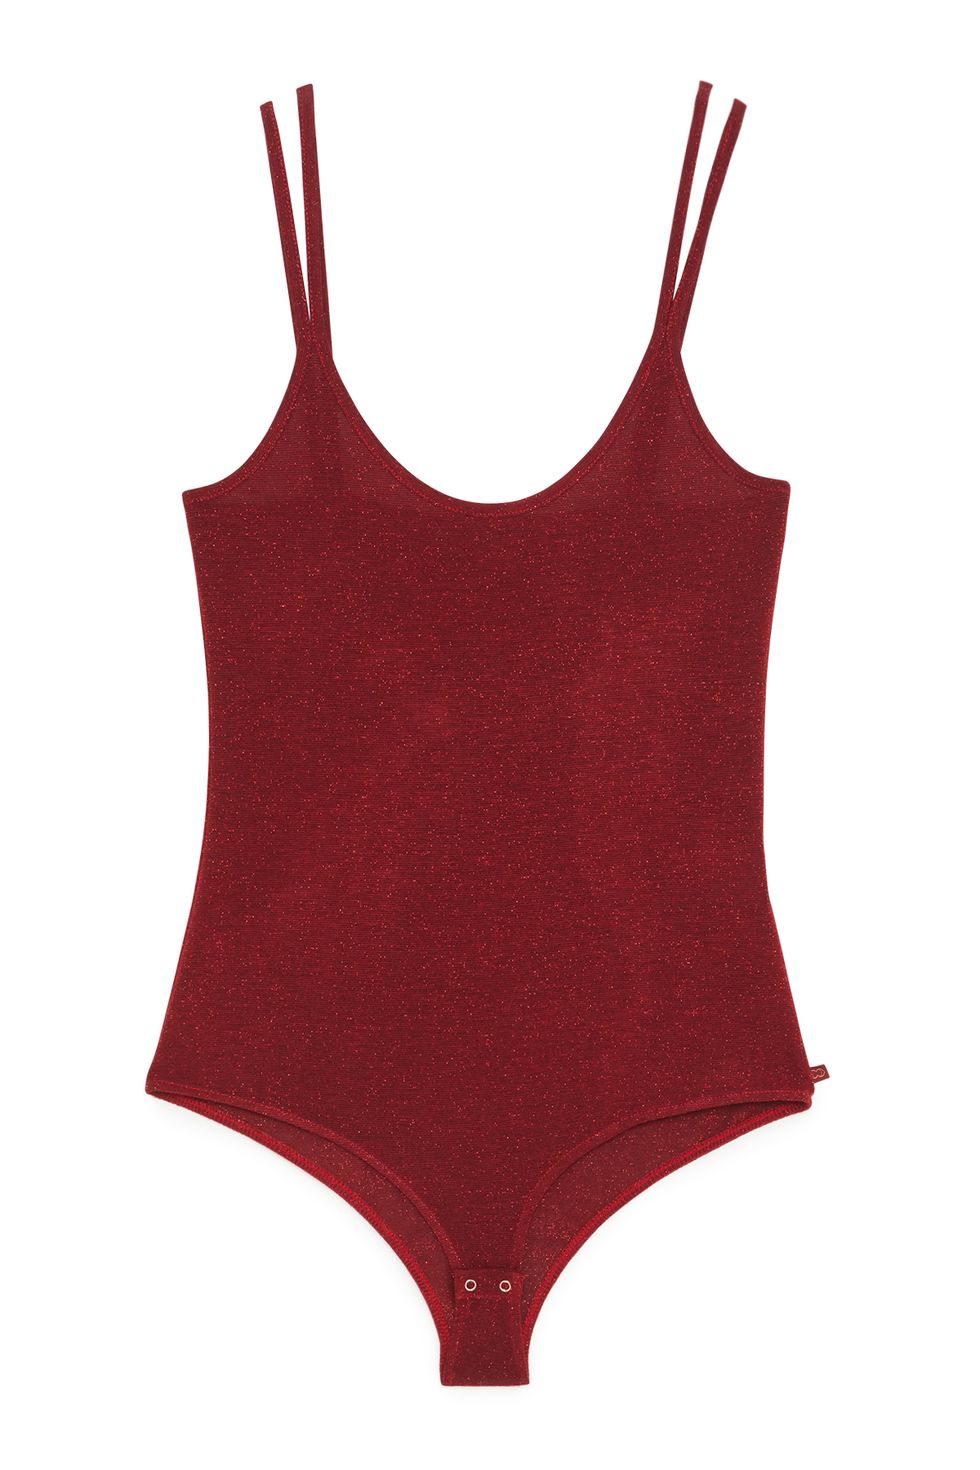 Clothing, Undergarment, Red, Product, Brassiere, Lingerie, camisoles, Swimwear, 